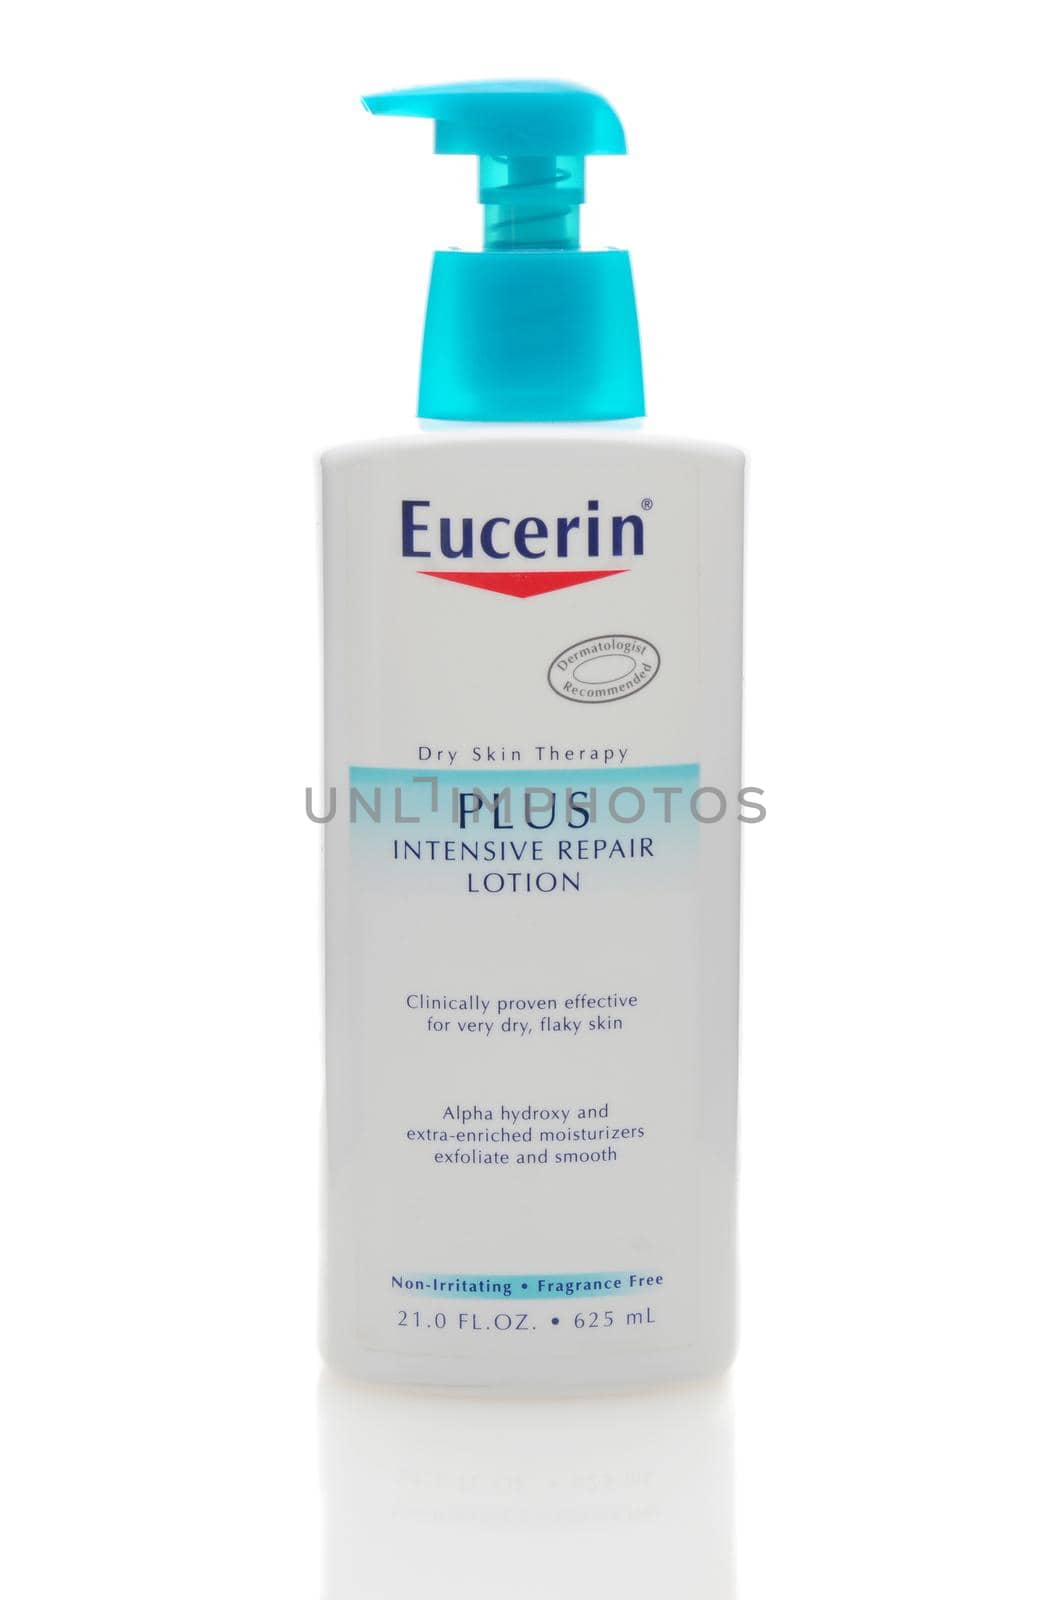 Eucerin Dry Skin Therapy Lotion by sCukrov